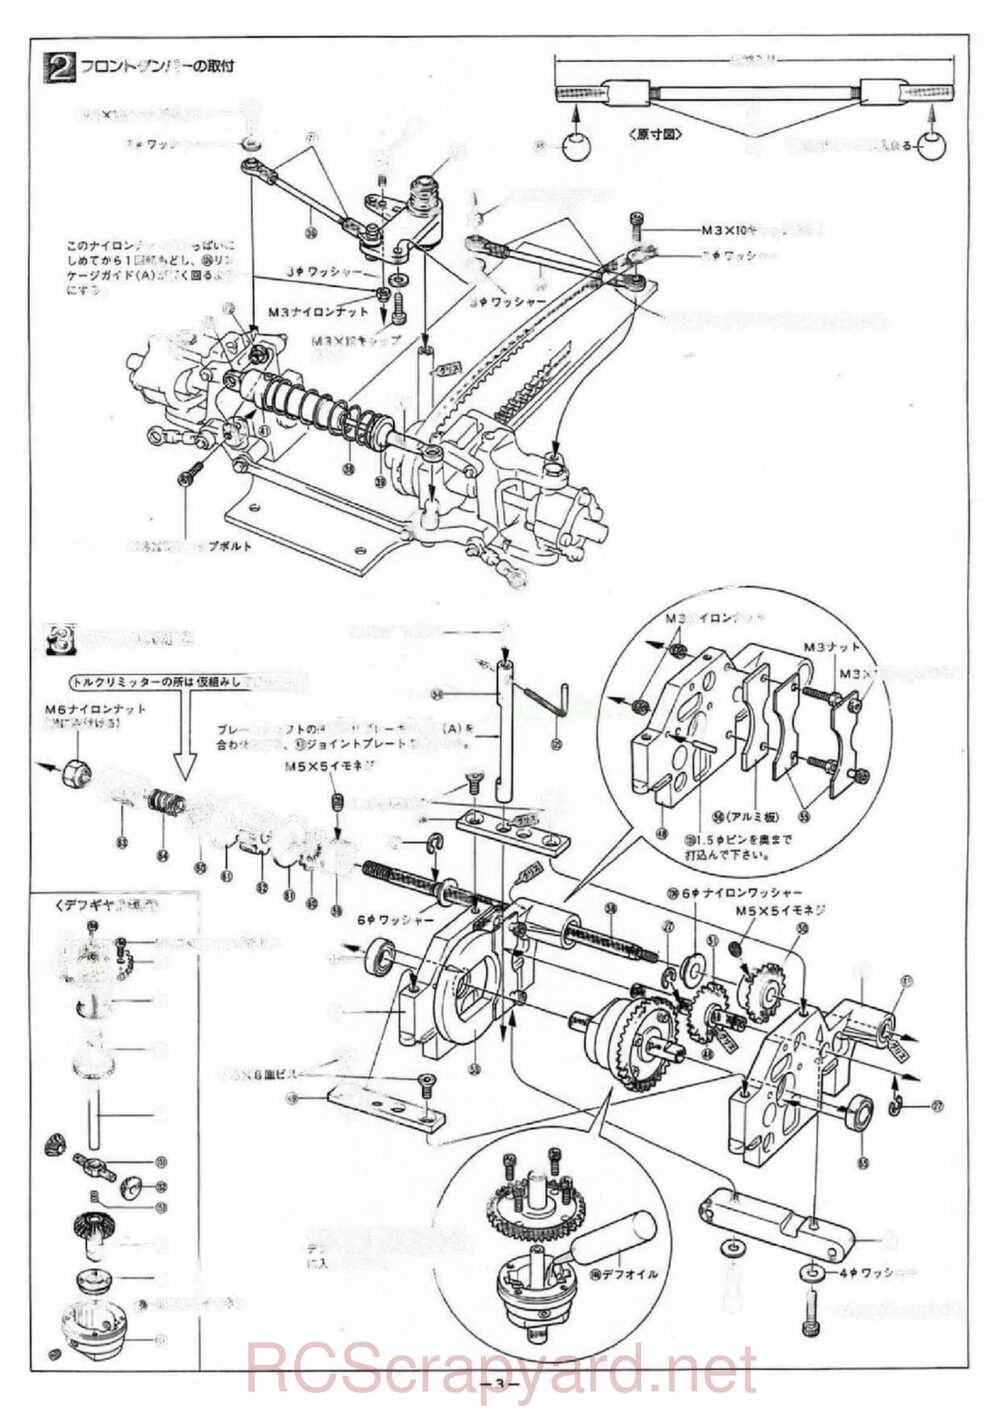 Kyosho - 3121 - Fantom-21 4iS - Manual - Page 03